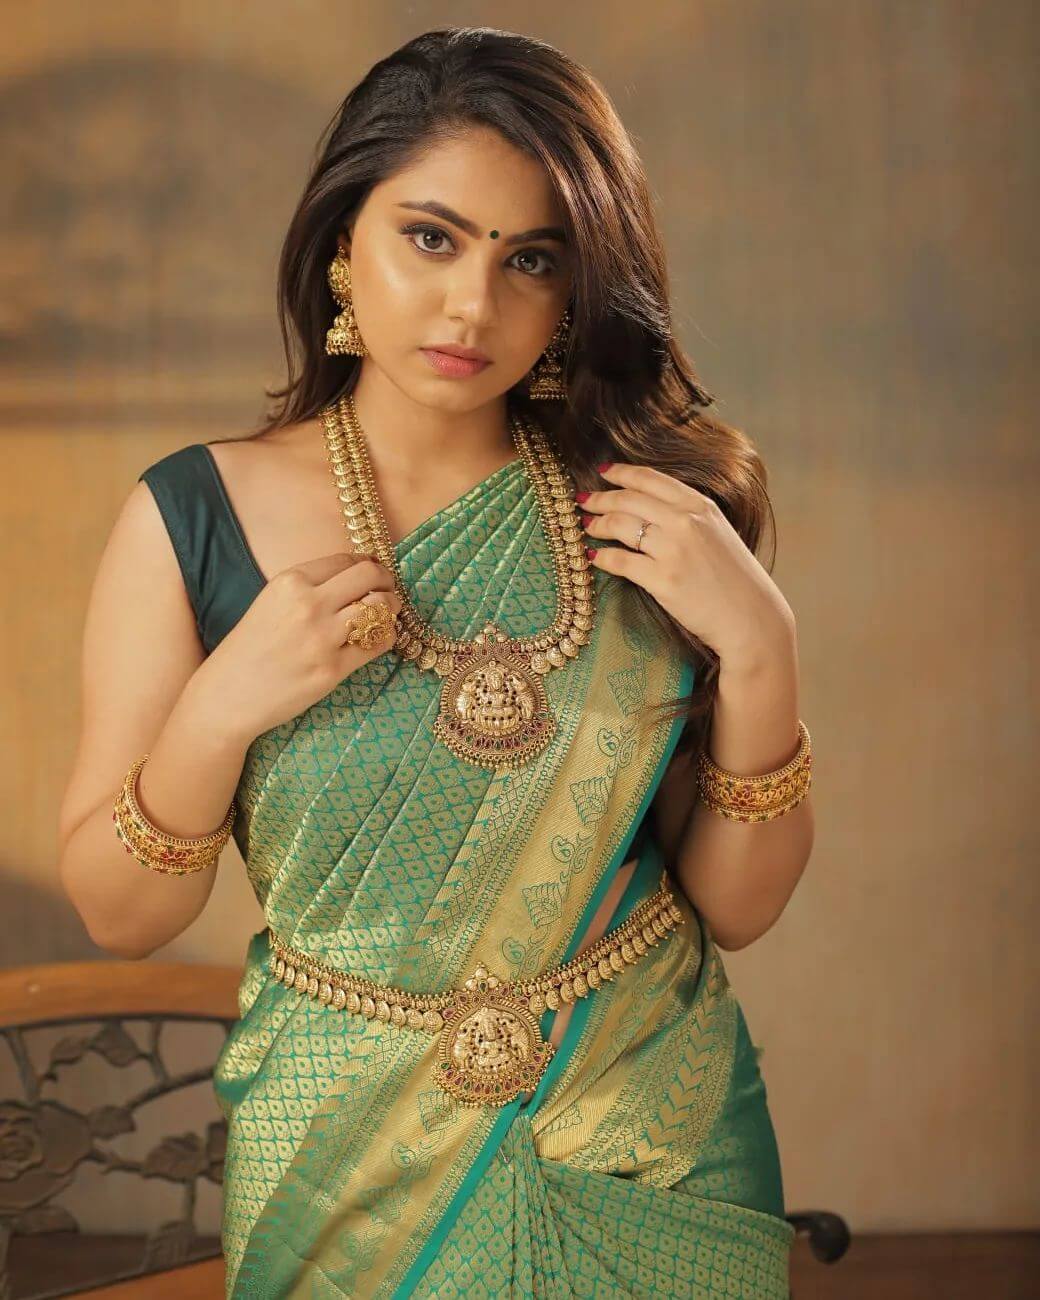 Beautiful Monica Chinnakotla In Blue & Golden Kanjeevaram Silk Saree With Traditional Temple Design Gold Jewellery Can Be Your Festive Look